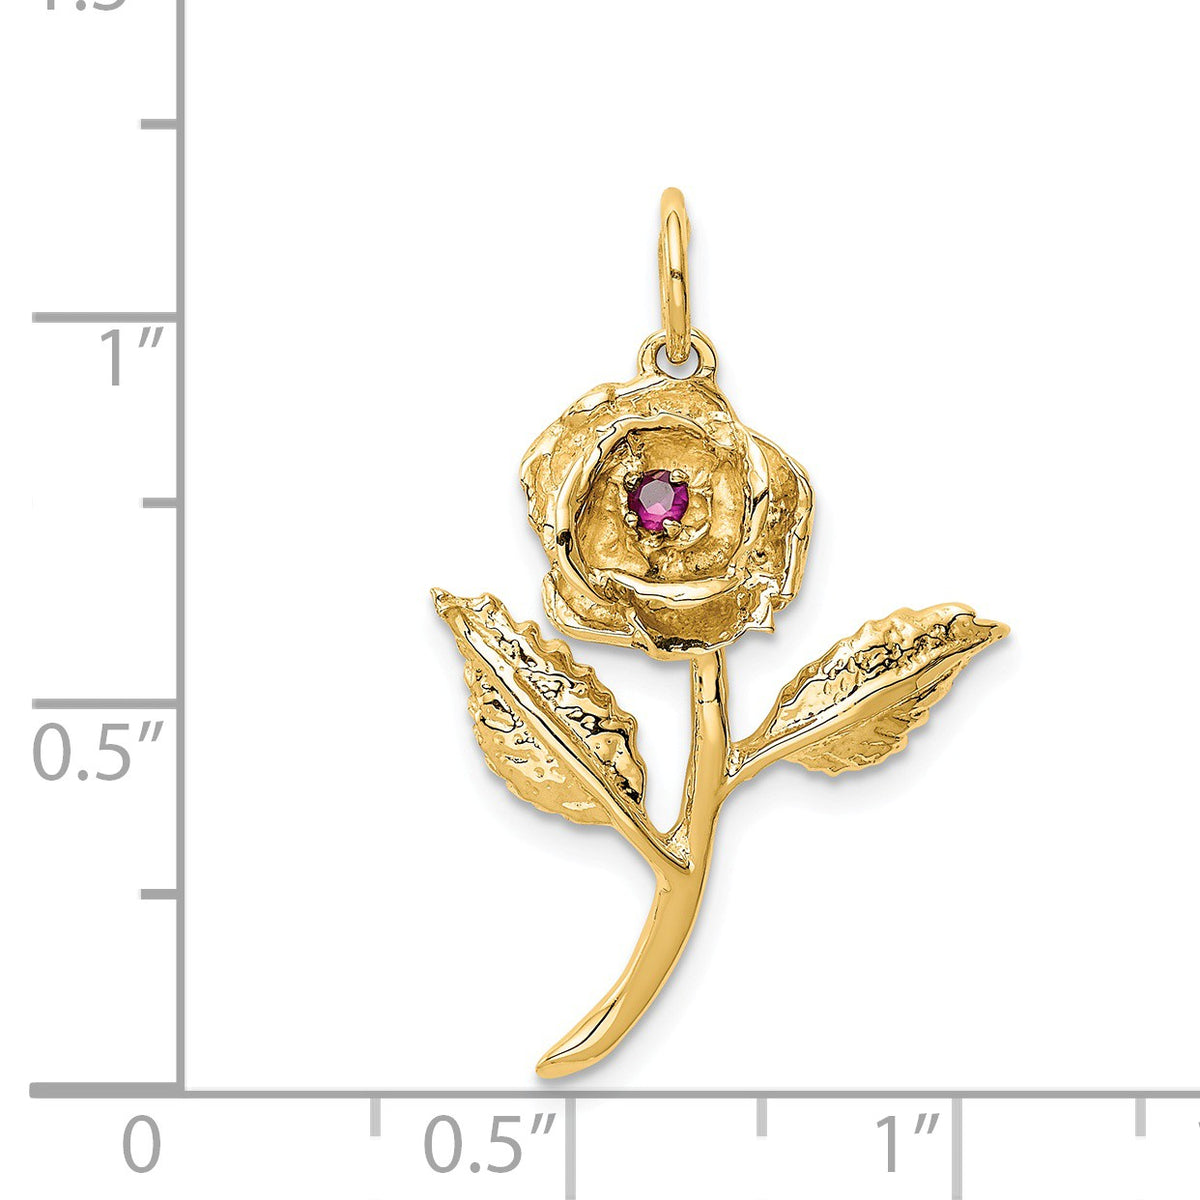 Alternate view of the 14k Yellow Gold Red Cubic Zirconia Accented 3D Rose Pendant by The Black Bow Jewelry Co.